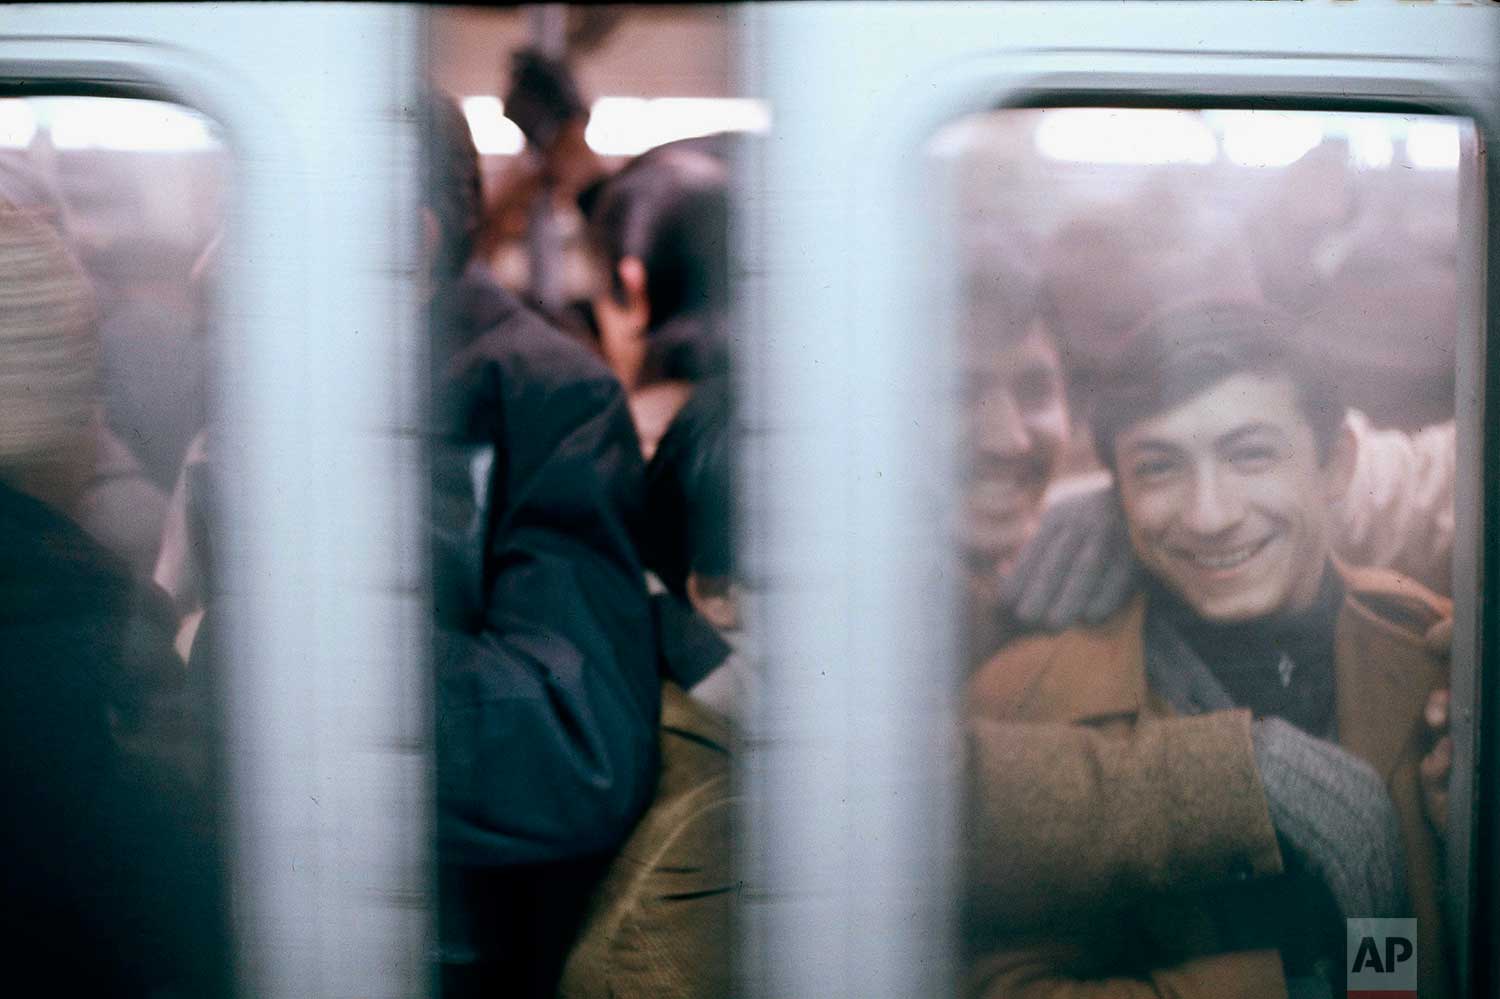  Some passengers show good humor as they pack themselves like sardines in a subway car at the height of the rush hour in New York City, 1966. (AP Photo) 